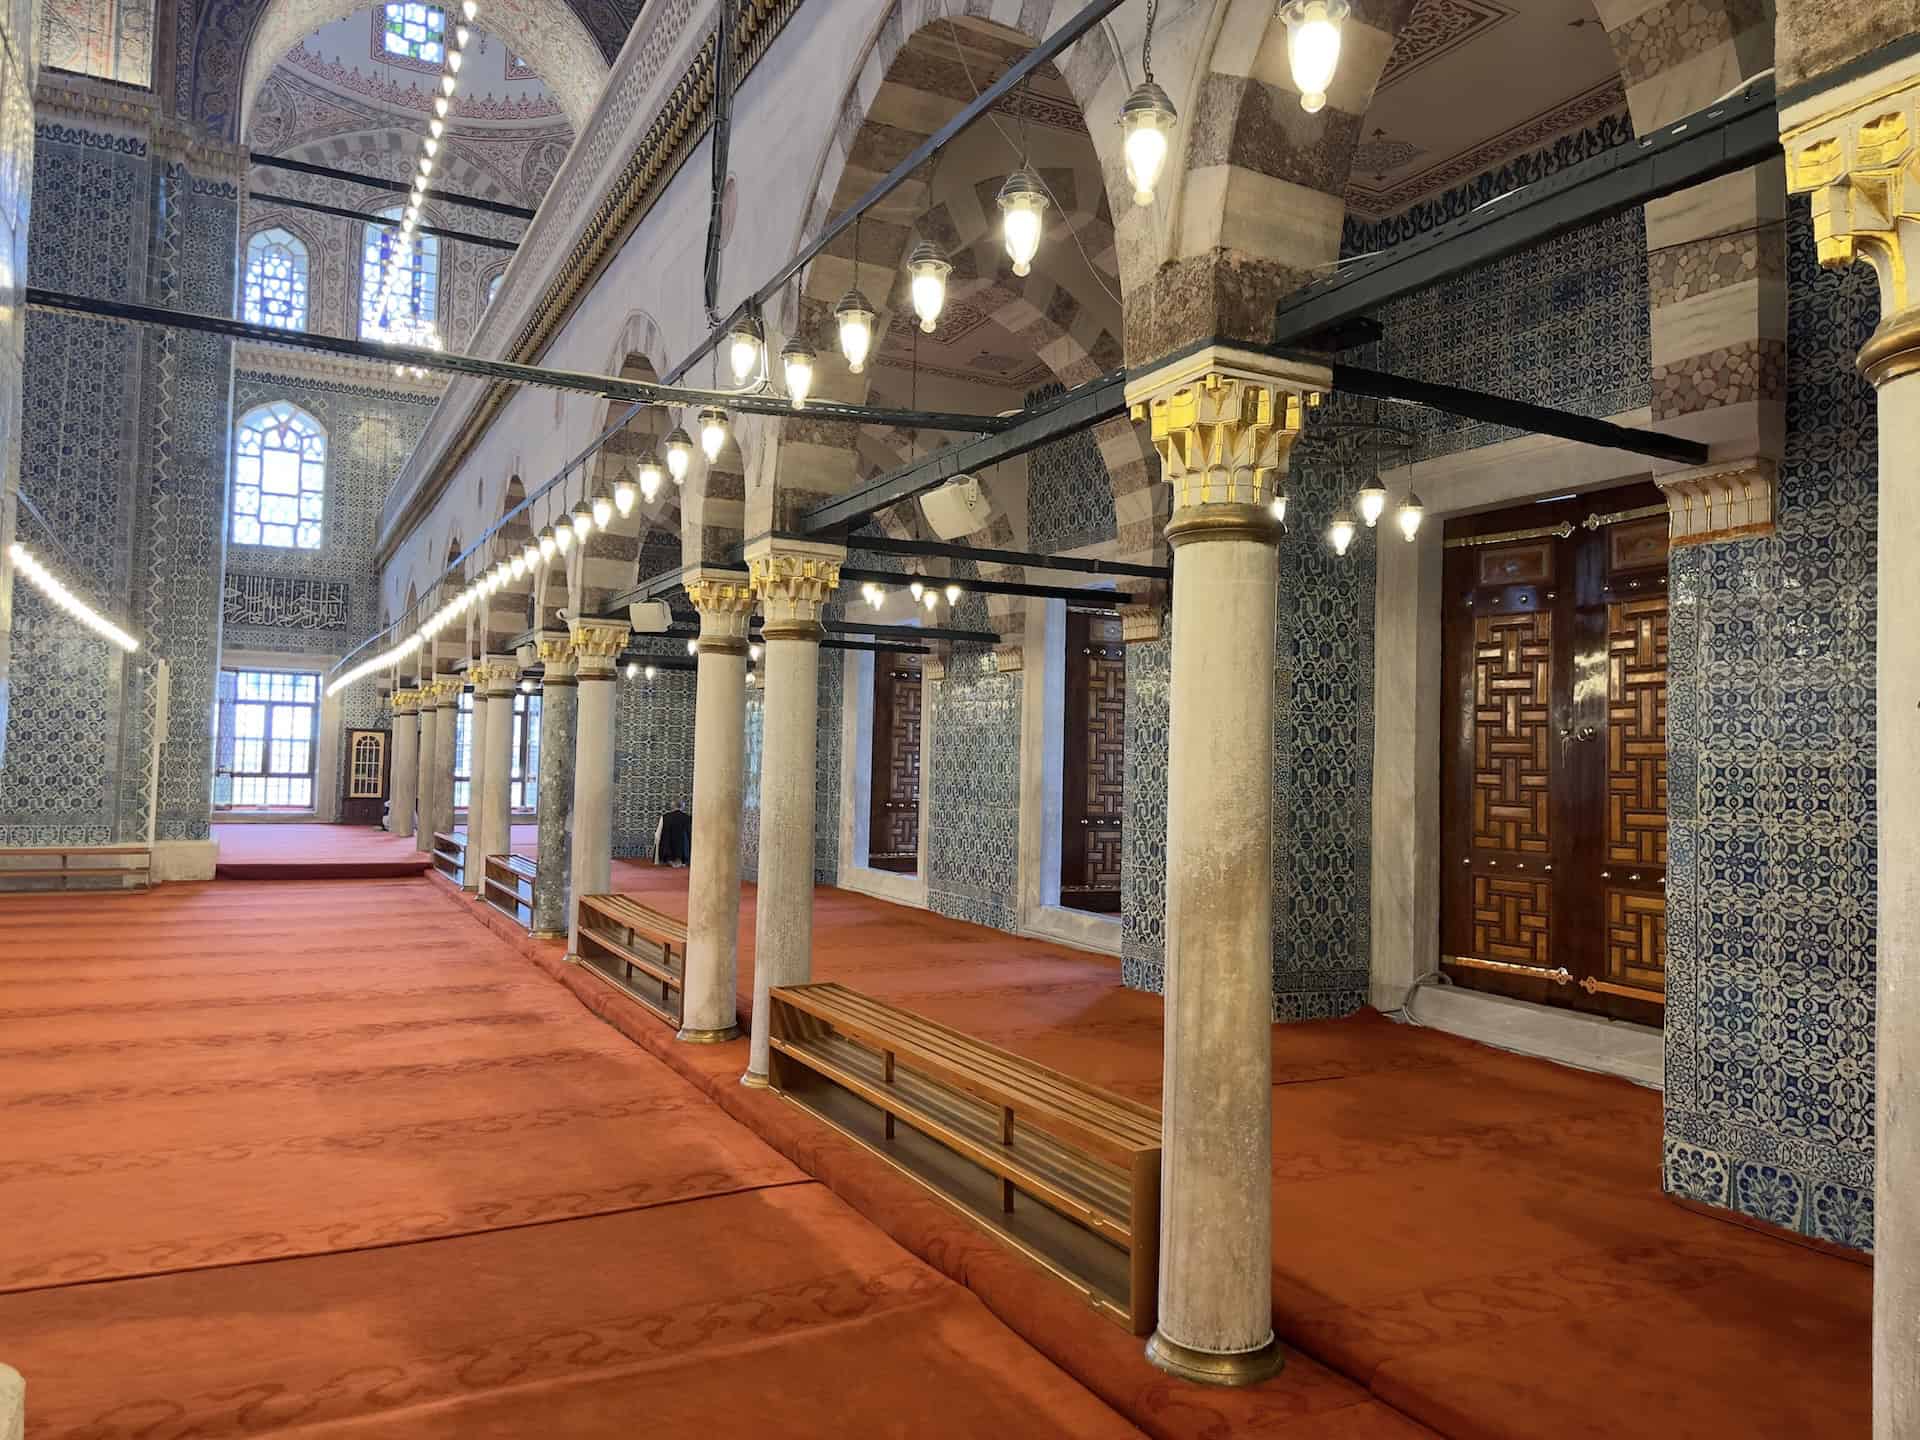 Colonnade on the right side of the prayer hall